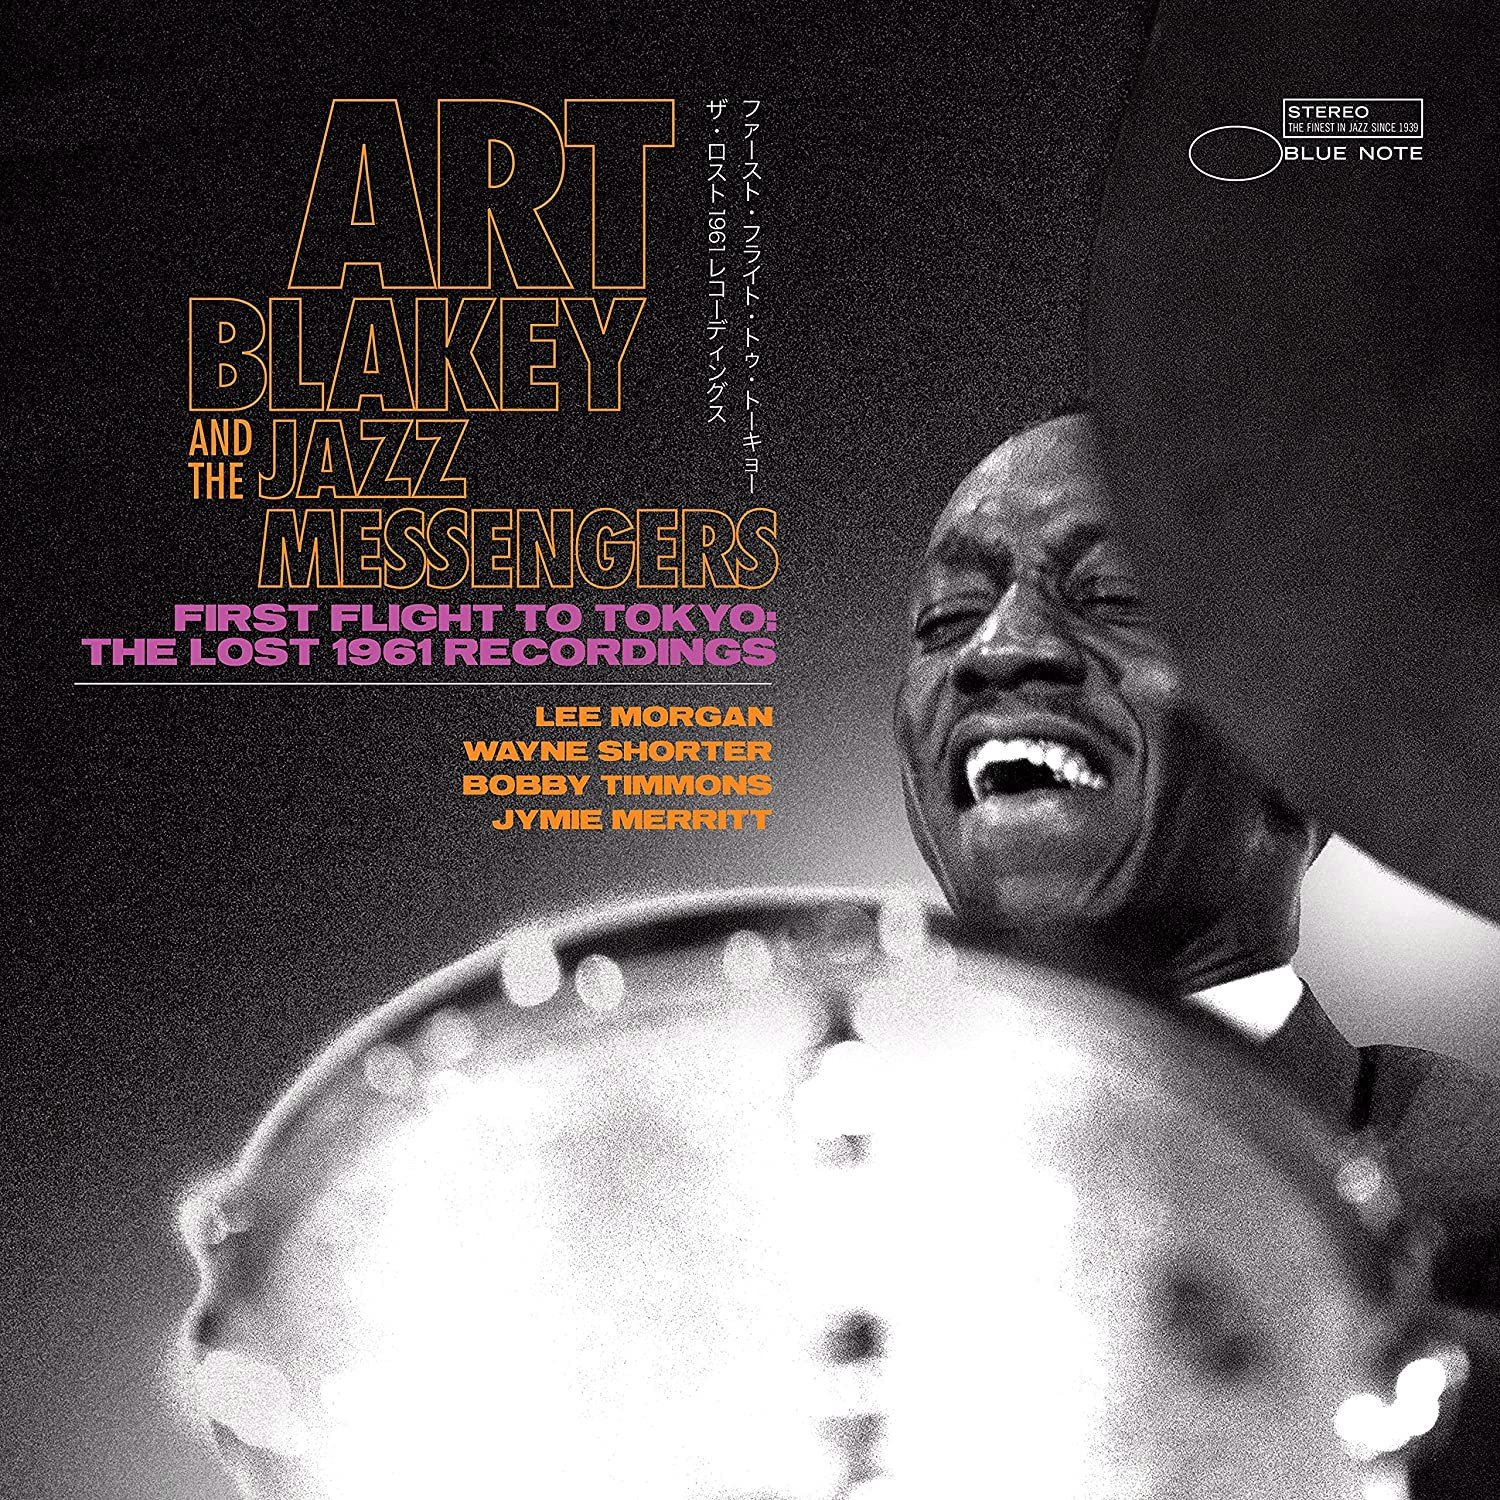 Art Blakey & The Jazz Messengers - First Flight To Tokyo: The Lost 1961 Recordings - 2LP (LP)